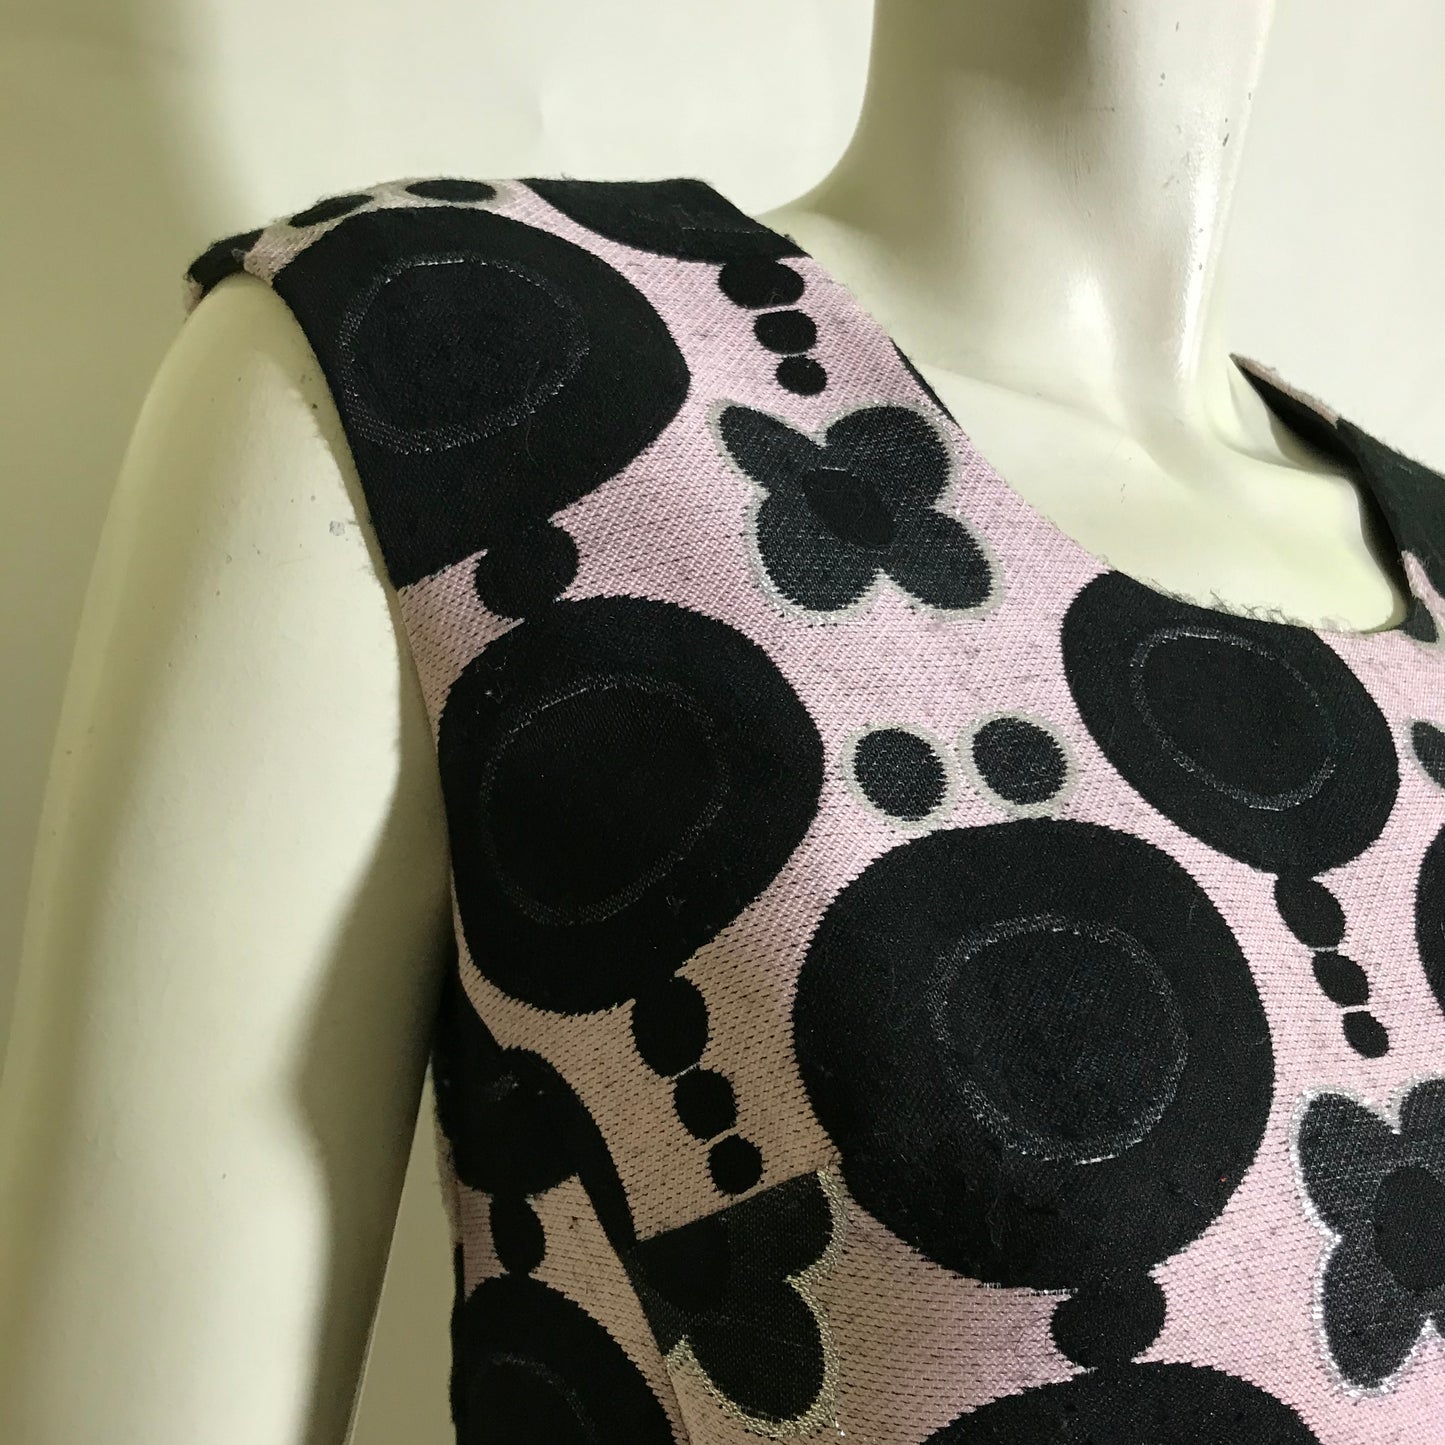 Pink SILVER and Black Glam Mod Cocktail Dress circa 1960s